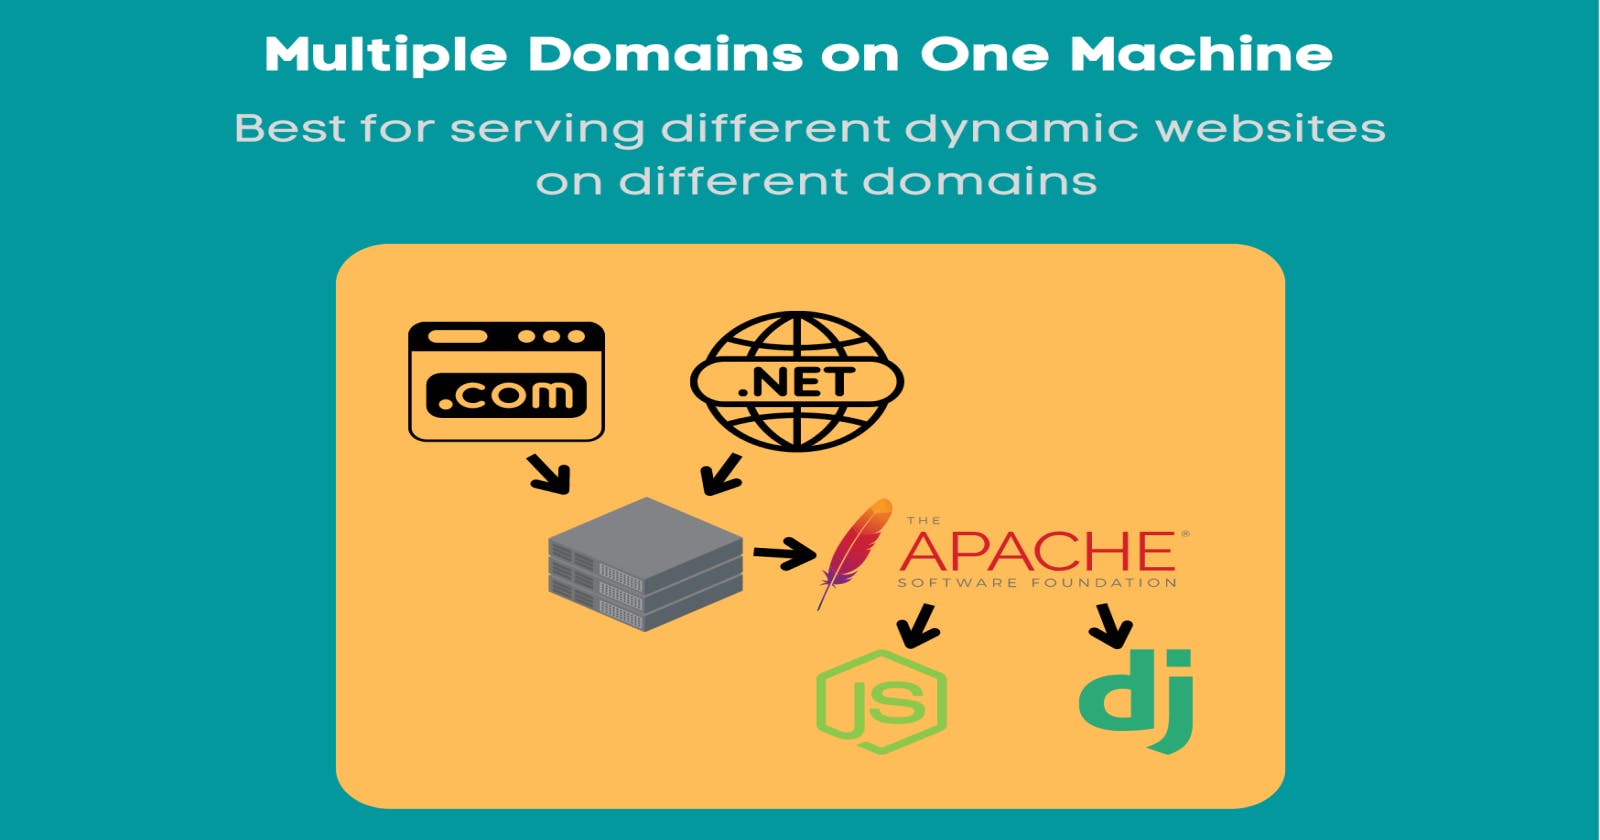 Multiple Websites, Different Domains, One Machine